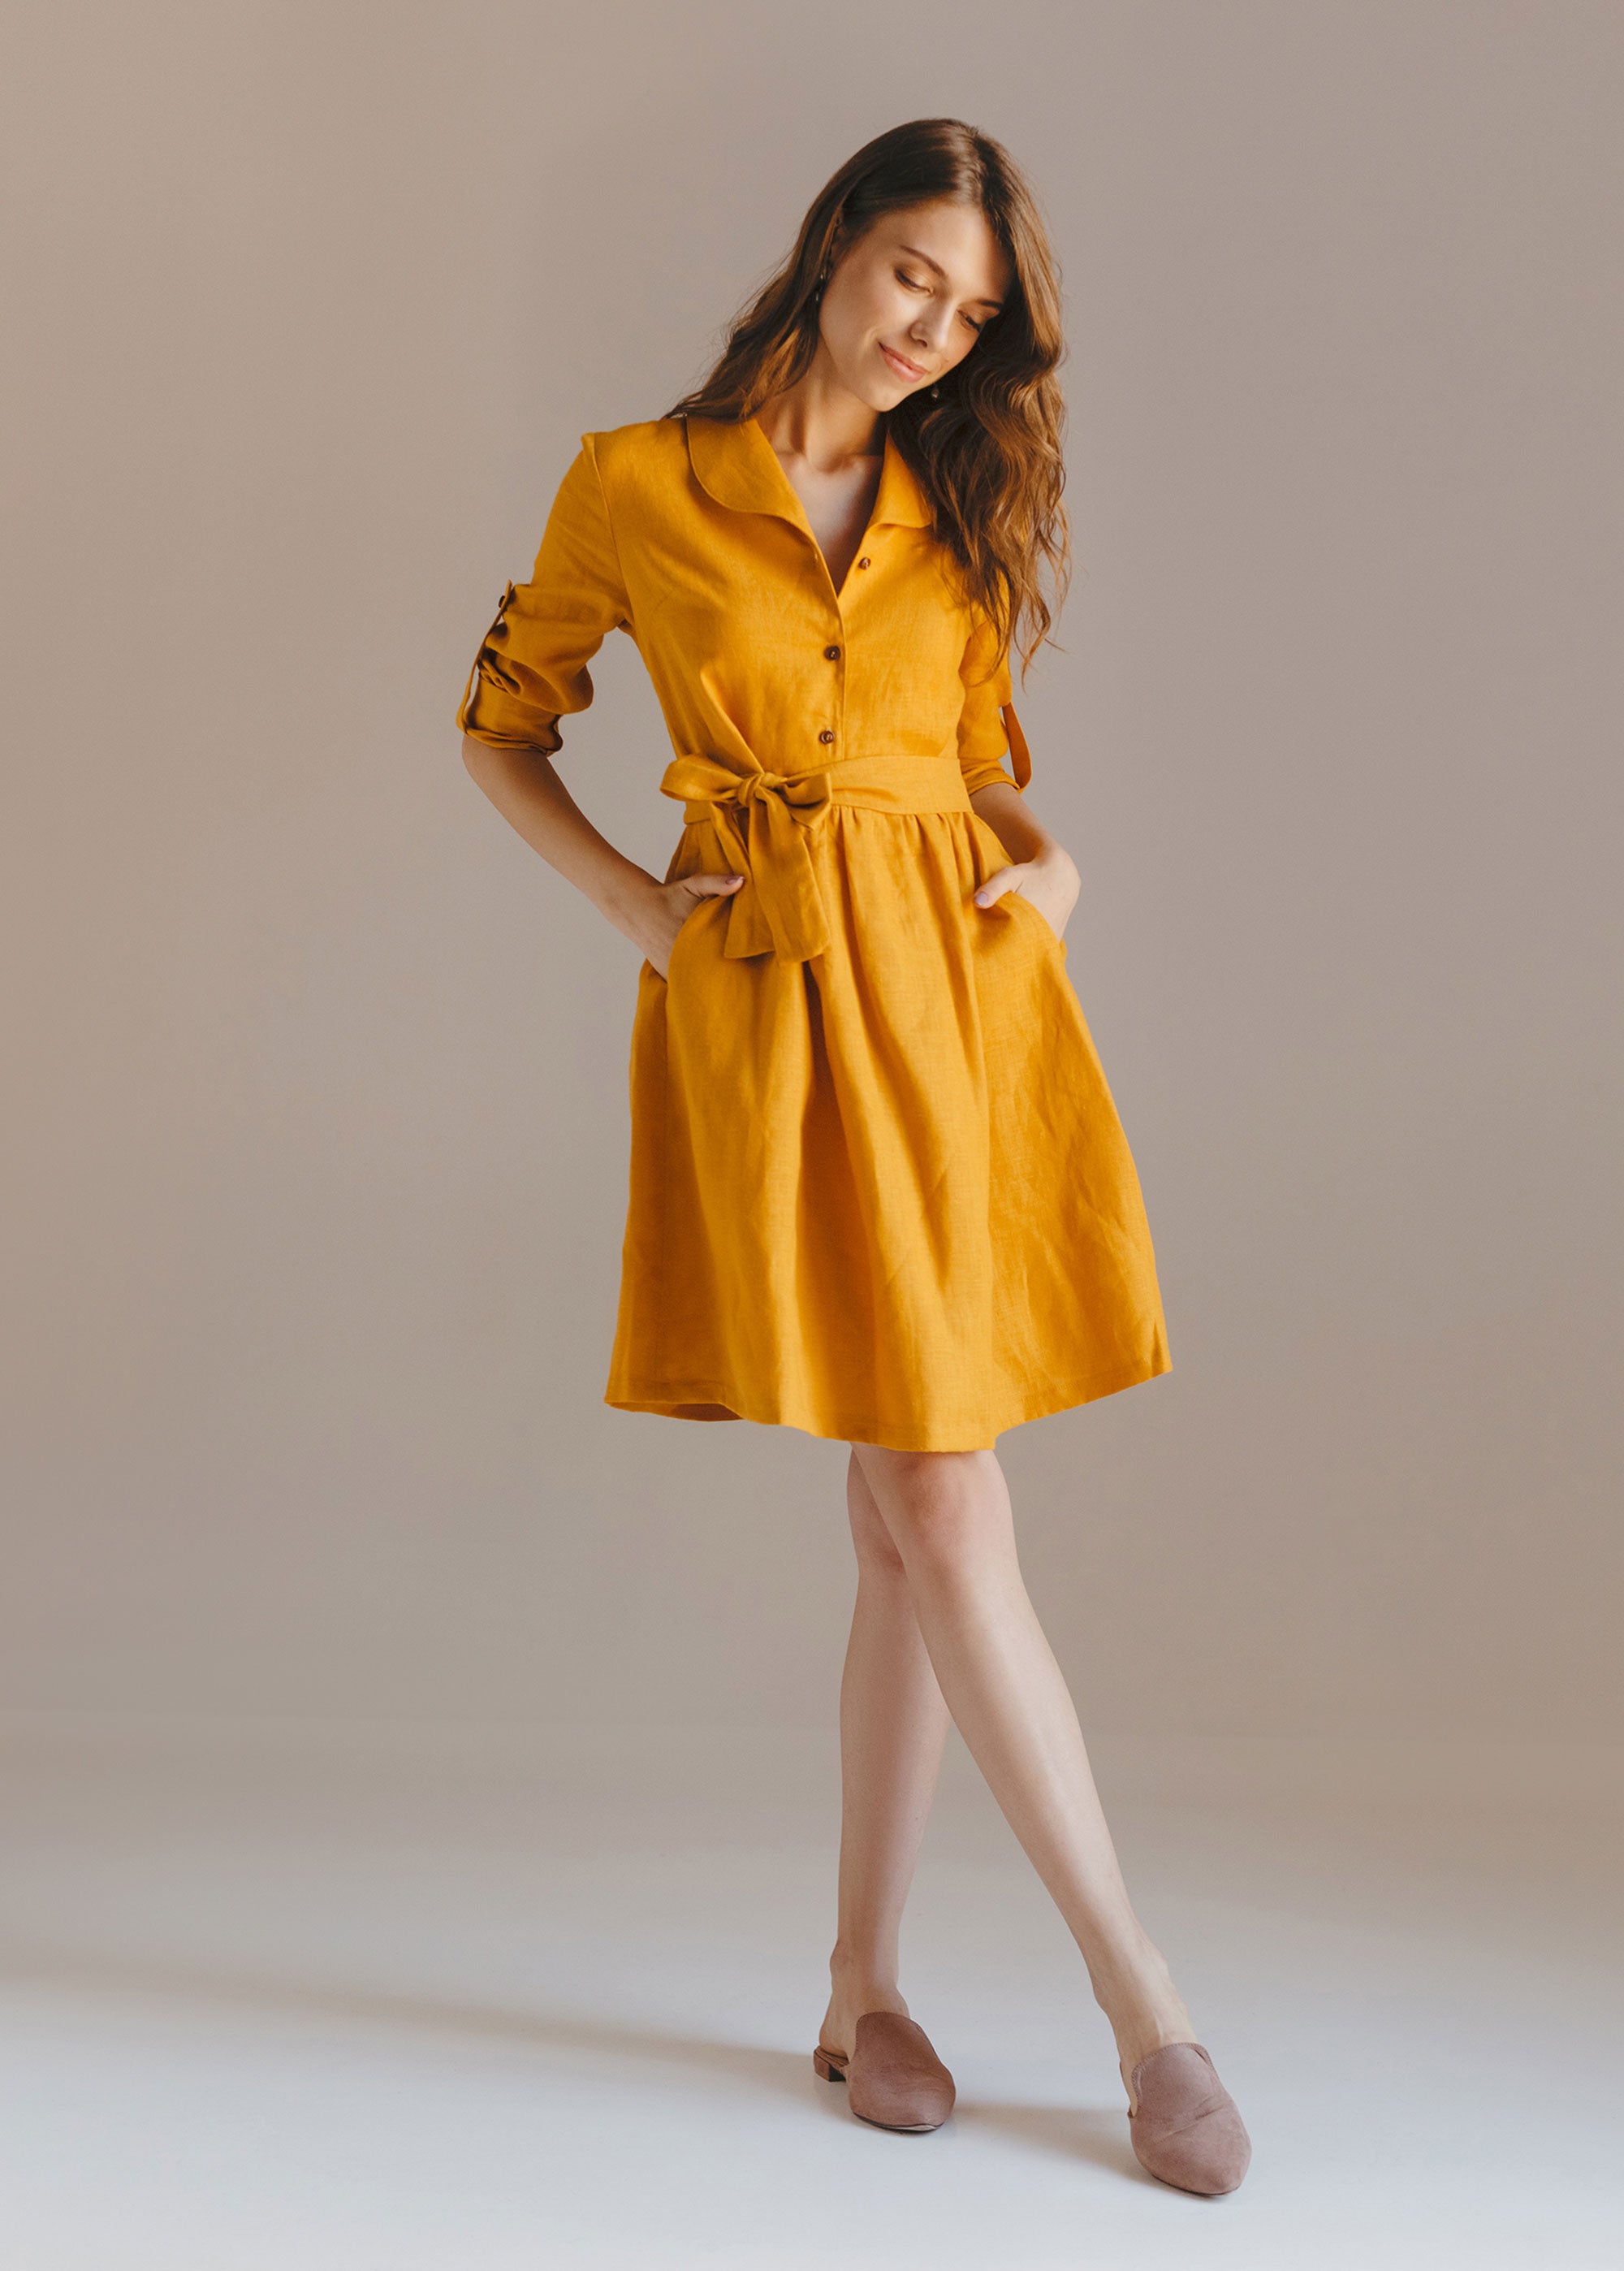 “Lily” Mustard Yellow Mini Dress with buttons